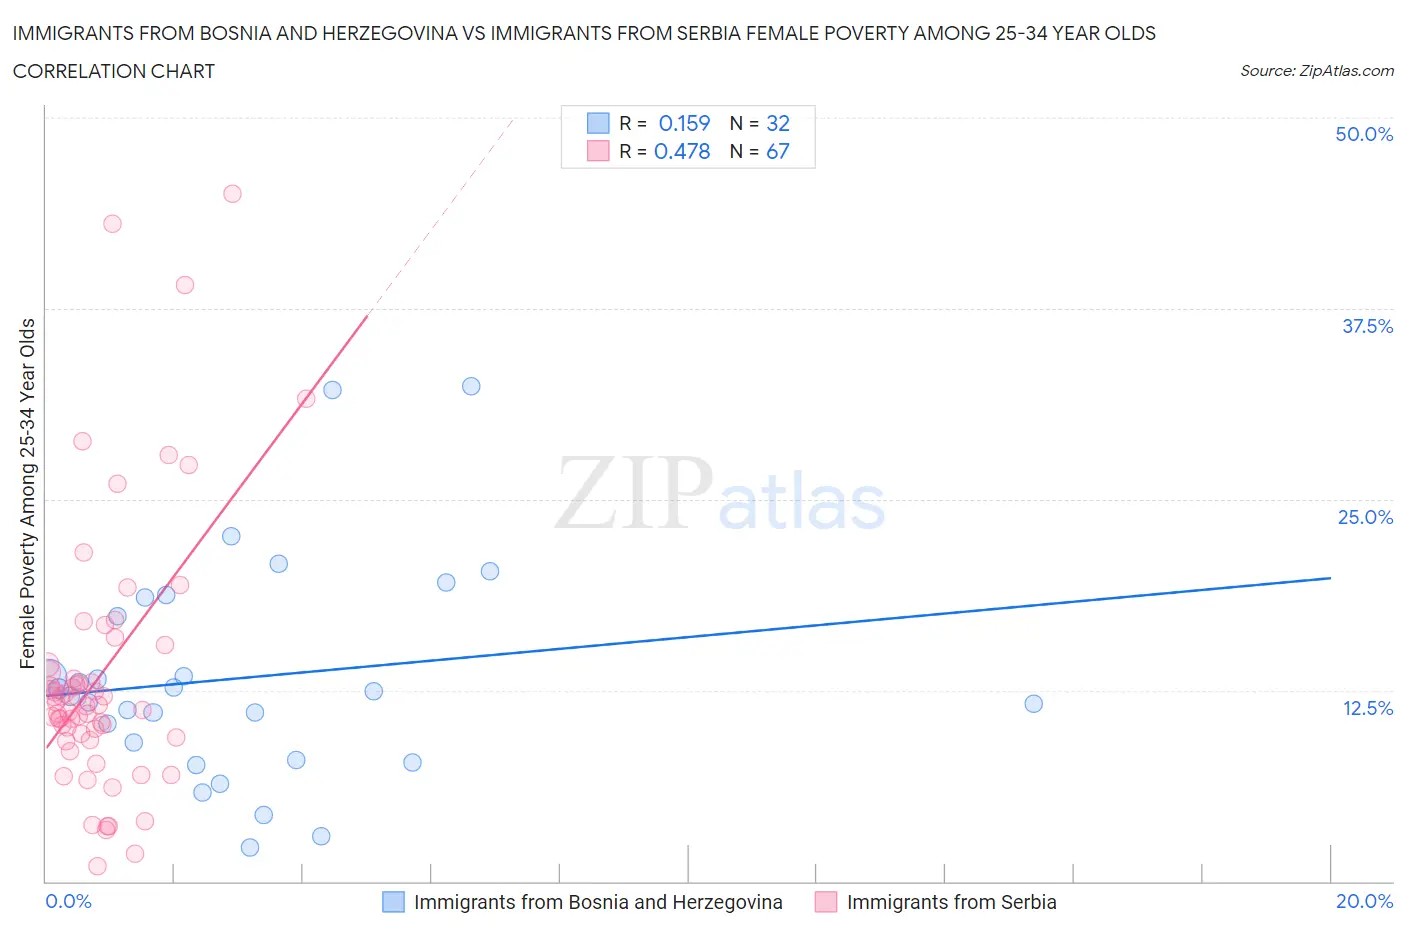 Immigrants from Bosnia and Herzegovina vs Immigrants from Serbia Female Poverty Among 25-34 Year Olds